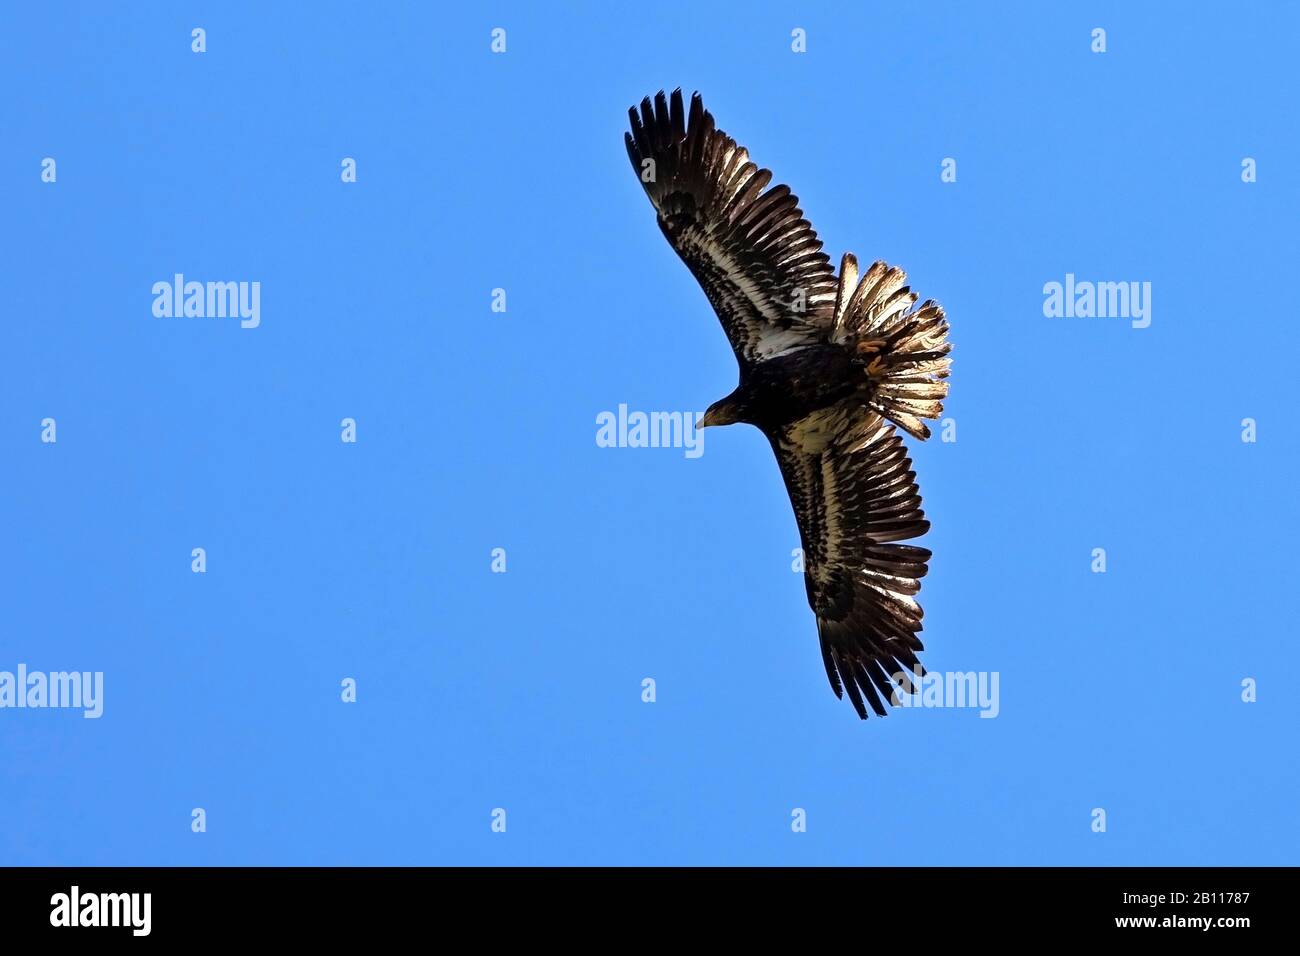 American bald eagle (Haliaeetus leucocephalus), young bird in flight in the blue sky, view from below, Pelm Stock Photo